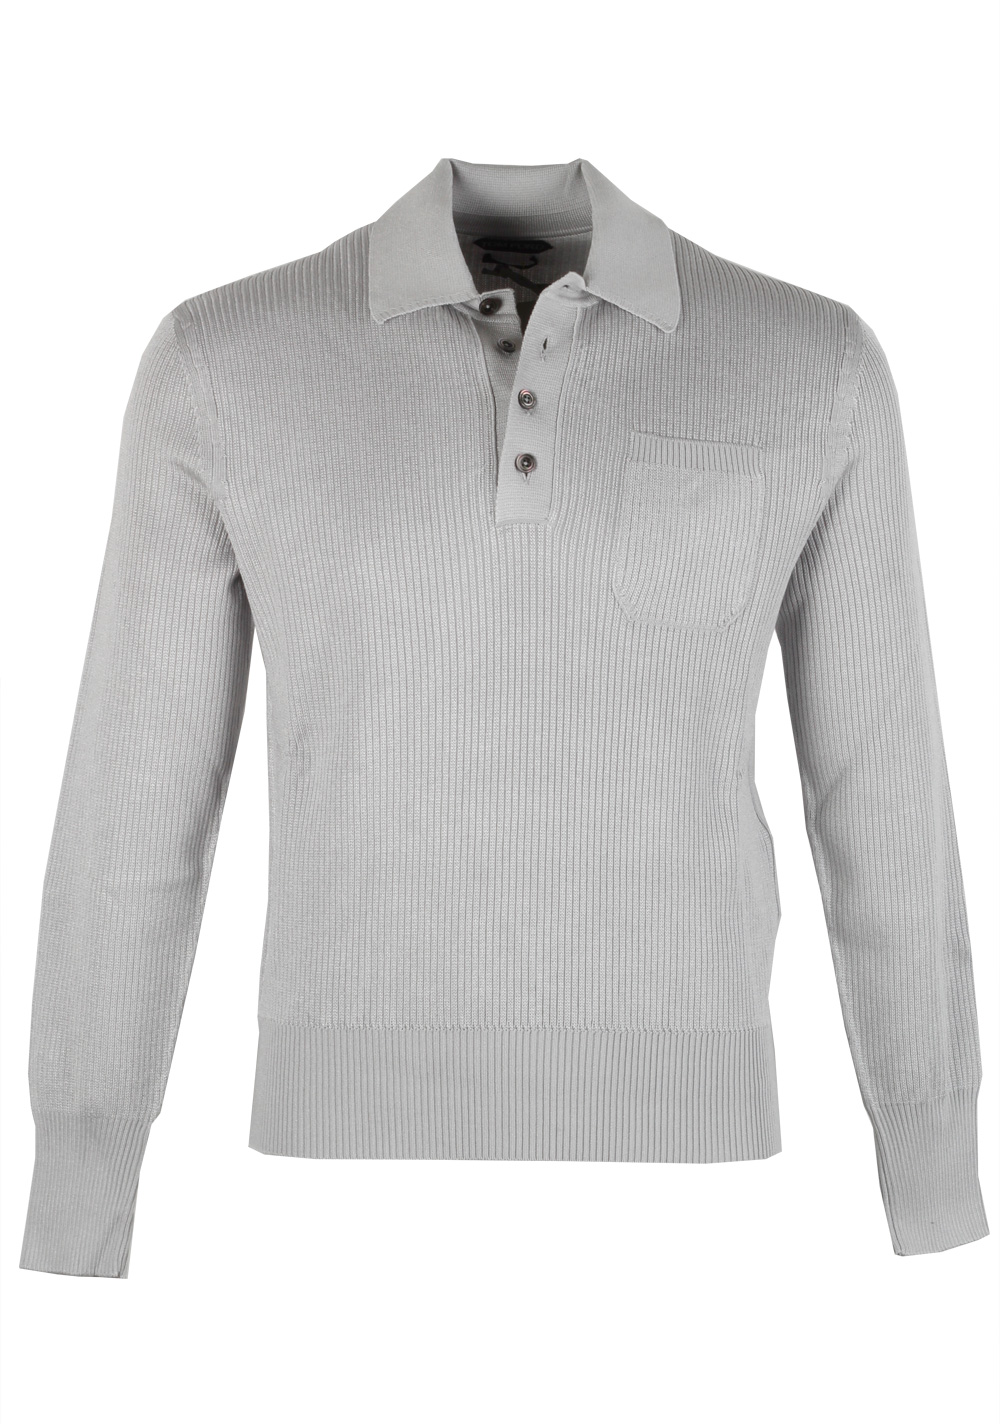 TOM FORD Gray Long Sleeve Polo Size Size 58 / 48R U.S. | Costume Limité